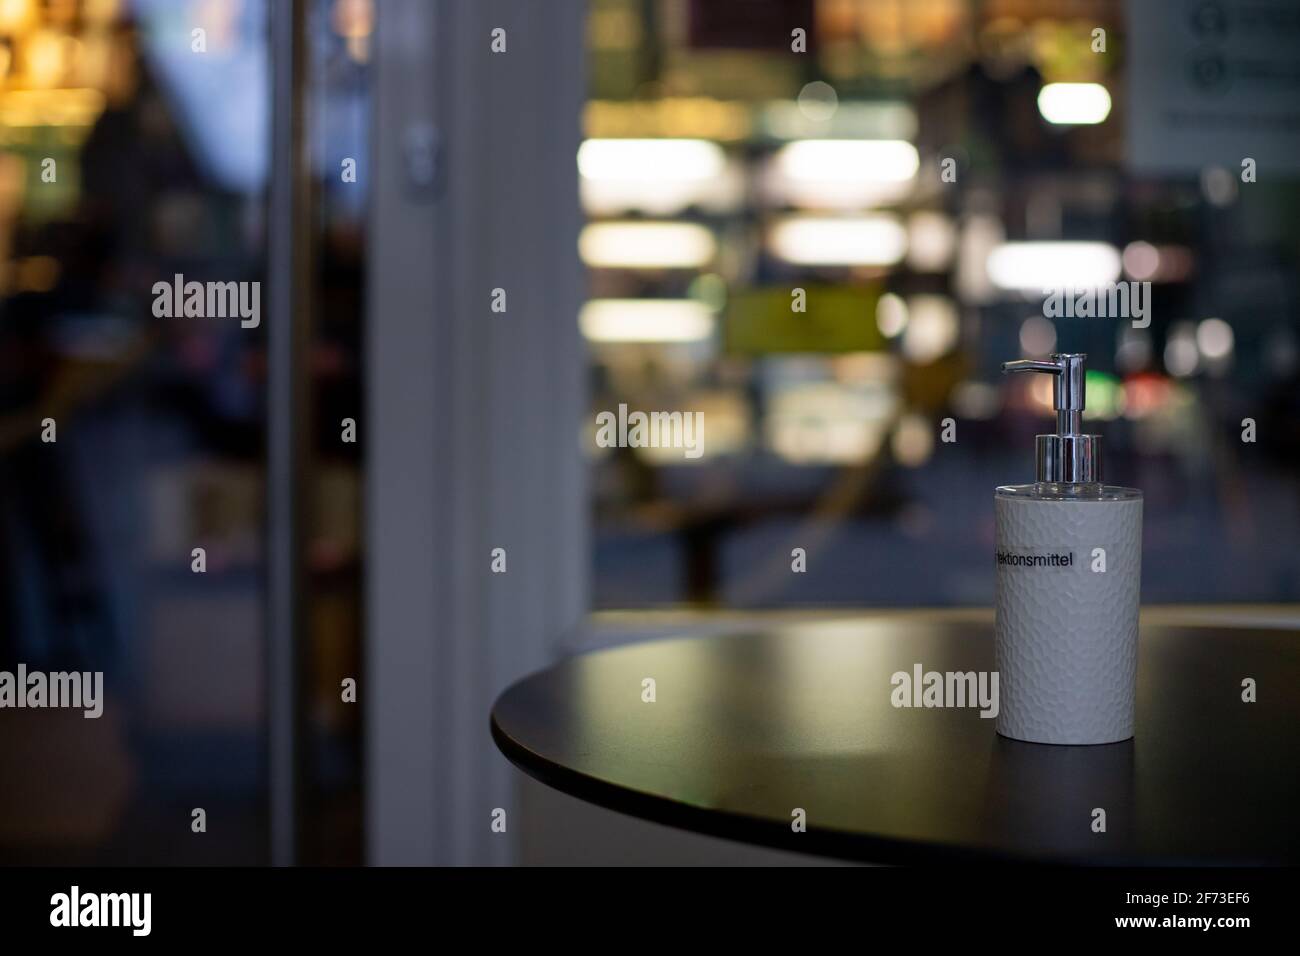 desinfection bottle on a table in front of a café during coronavirus lockdown in Germany with blurry background Stock Photo